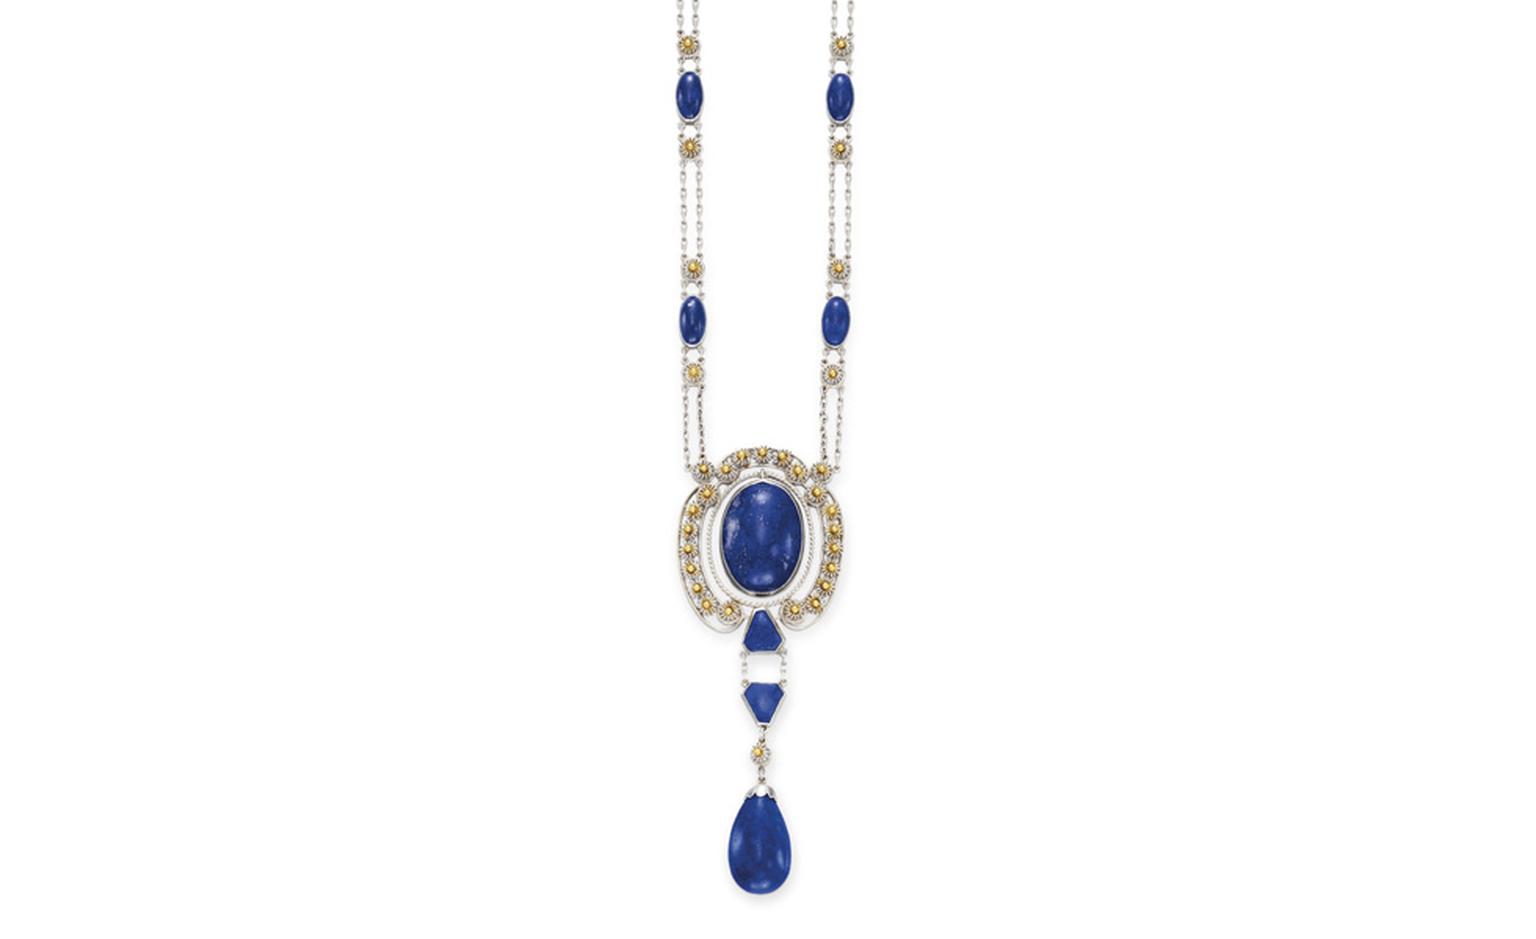 LOT 50 A LAPIS LAZULI, GOLD AND PLATINUM NECKLACE, BY LOUIS COMFORT TIFFANY, TIFFANY & CO.  circa 1915, 17 ins. By Louis Comfort Tiffany, signed Tiffany & Co. Estimate $12,000-$18,000. SOLD FOR $47,500